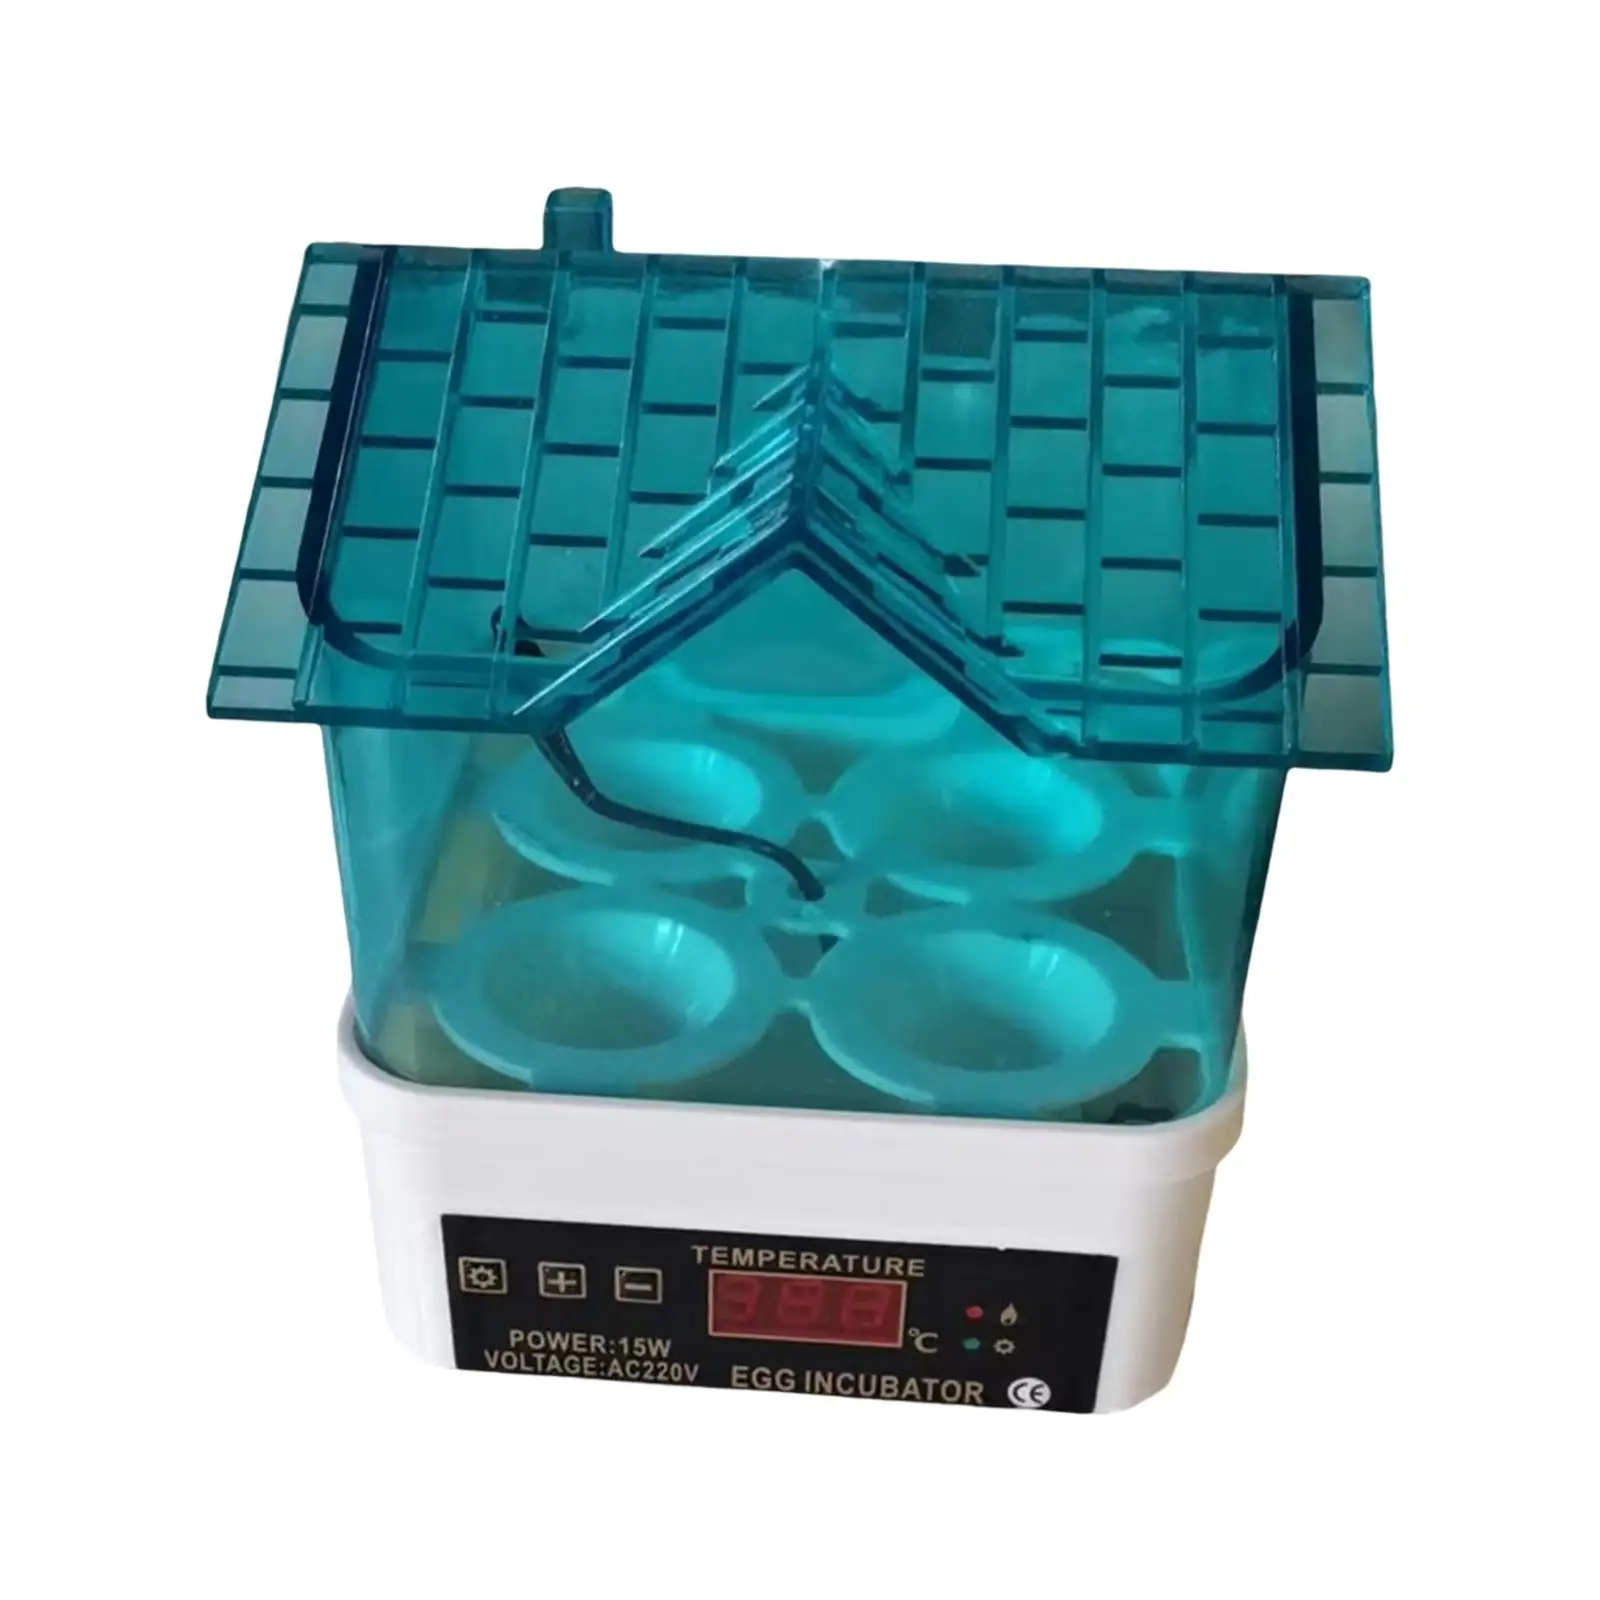 Digital Eggs Incubator Poultry Hatcher Tray Hatching 4 Eggs Temperature Control for Quail Bird